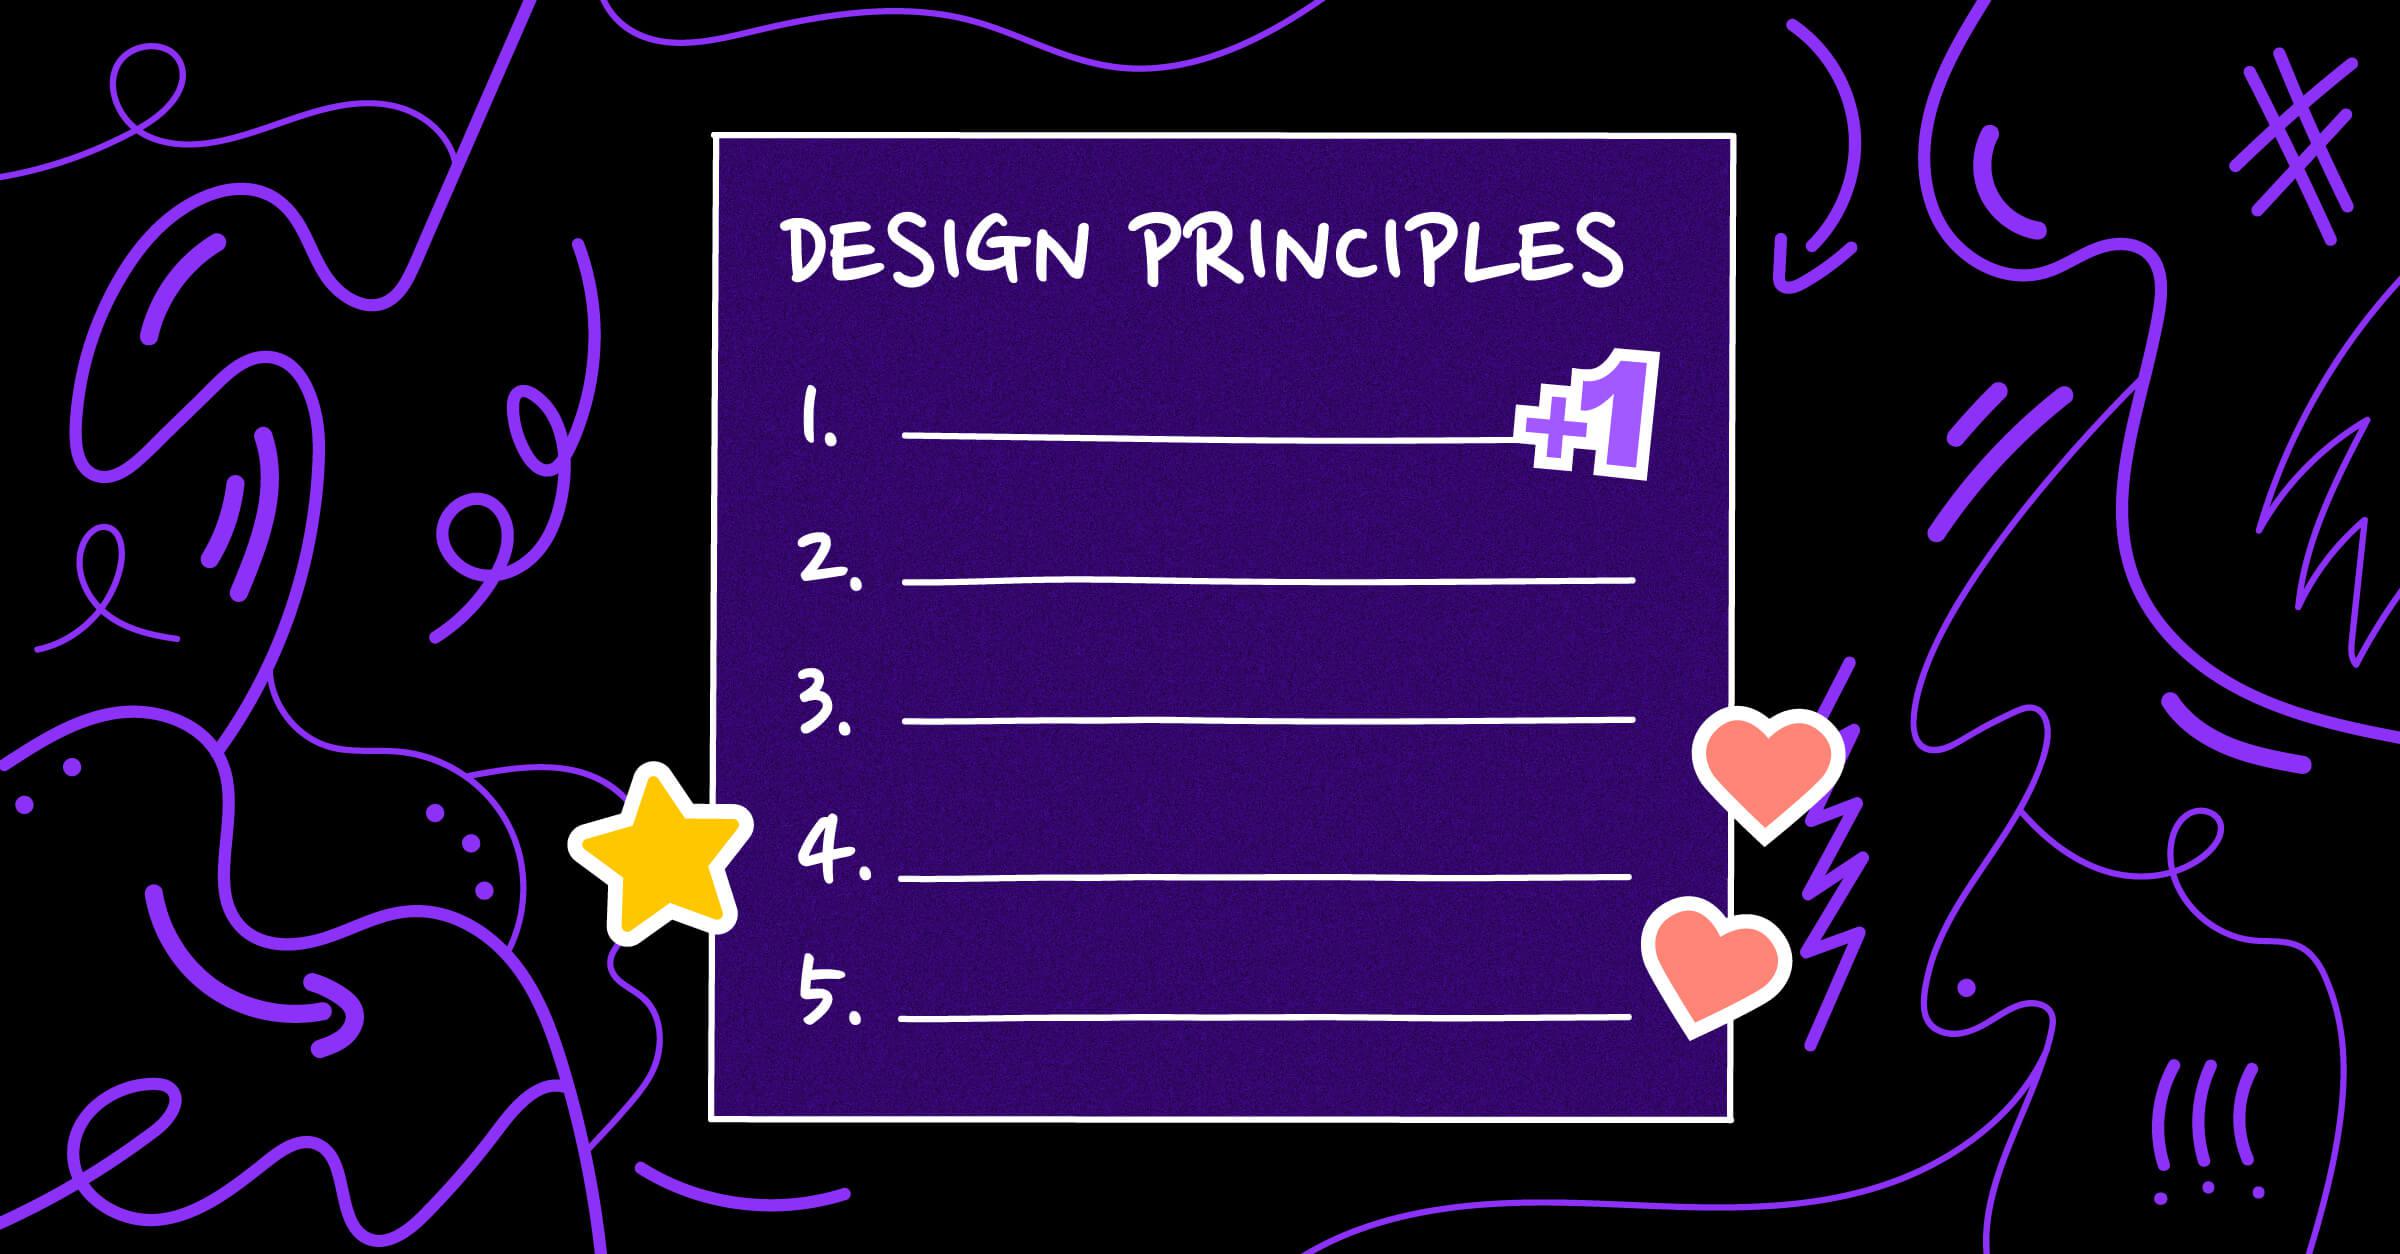 How we created Sourcegraph’s product design principles